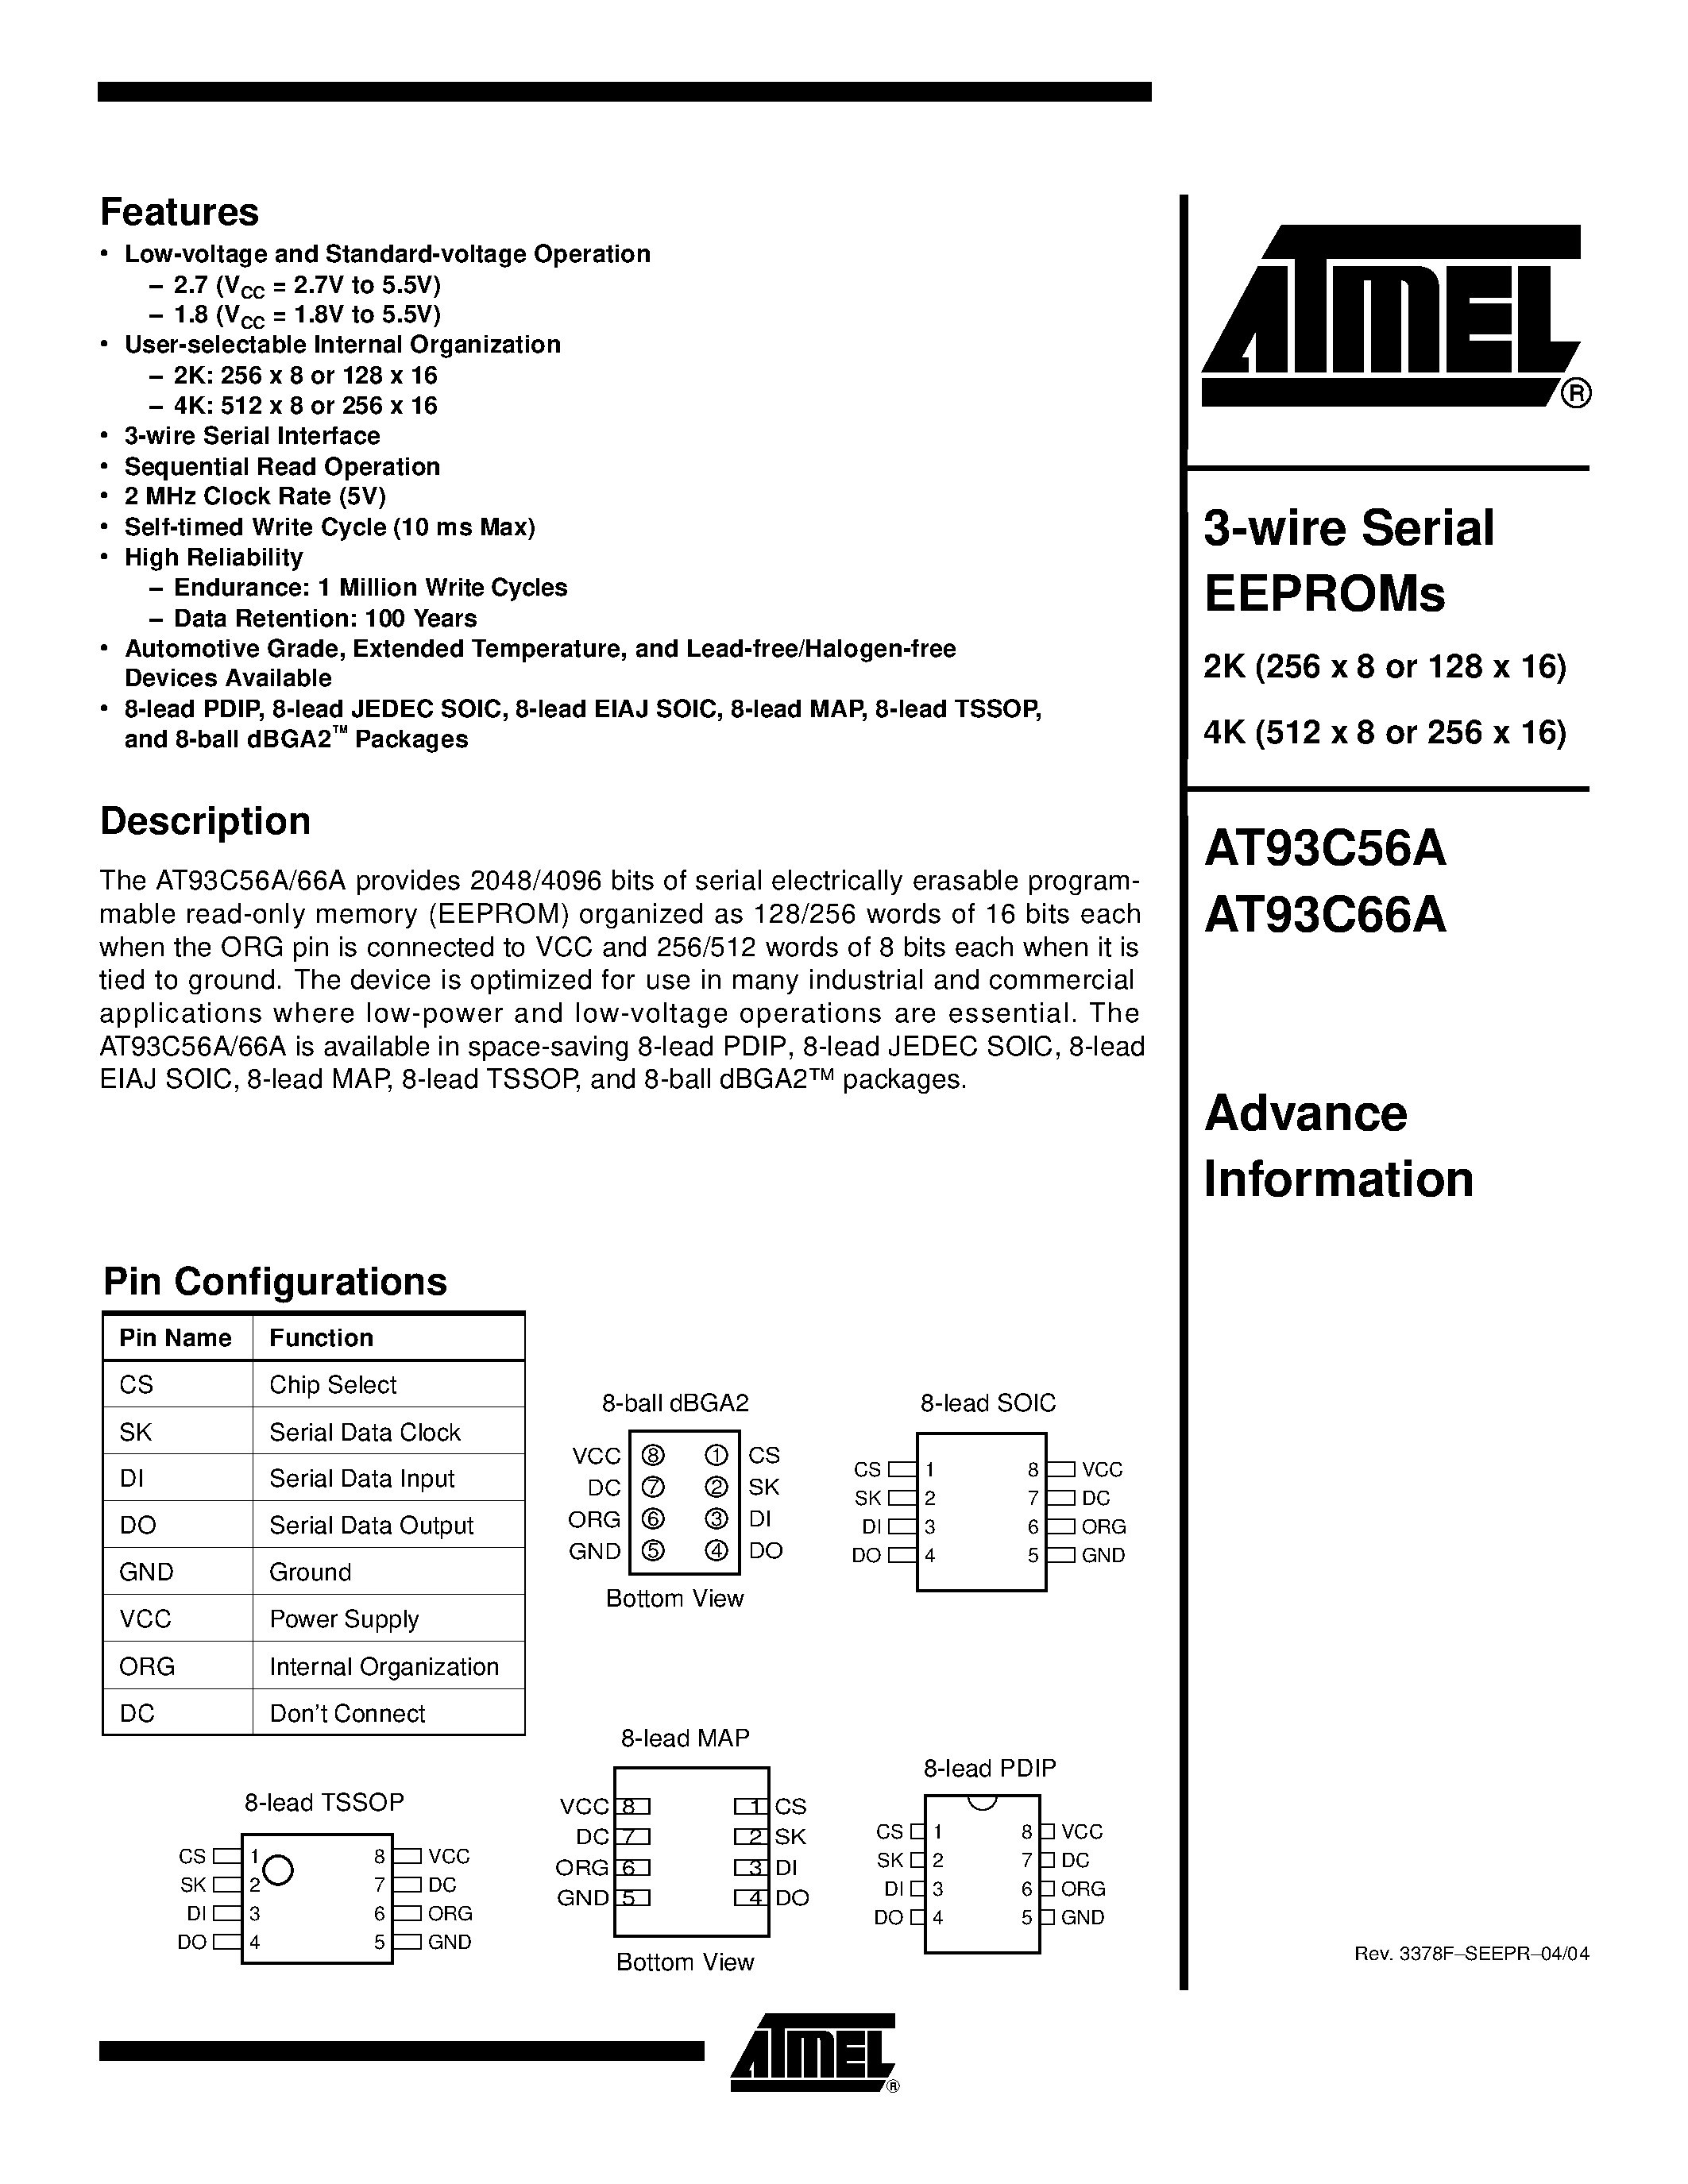 Datasheet AT93C66AY1-10YI-1.8 - 3-wire Serial EEPROMs 2K (256 x 8 or 128 x 16) page 1